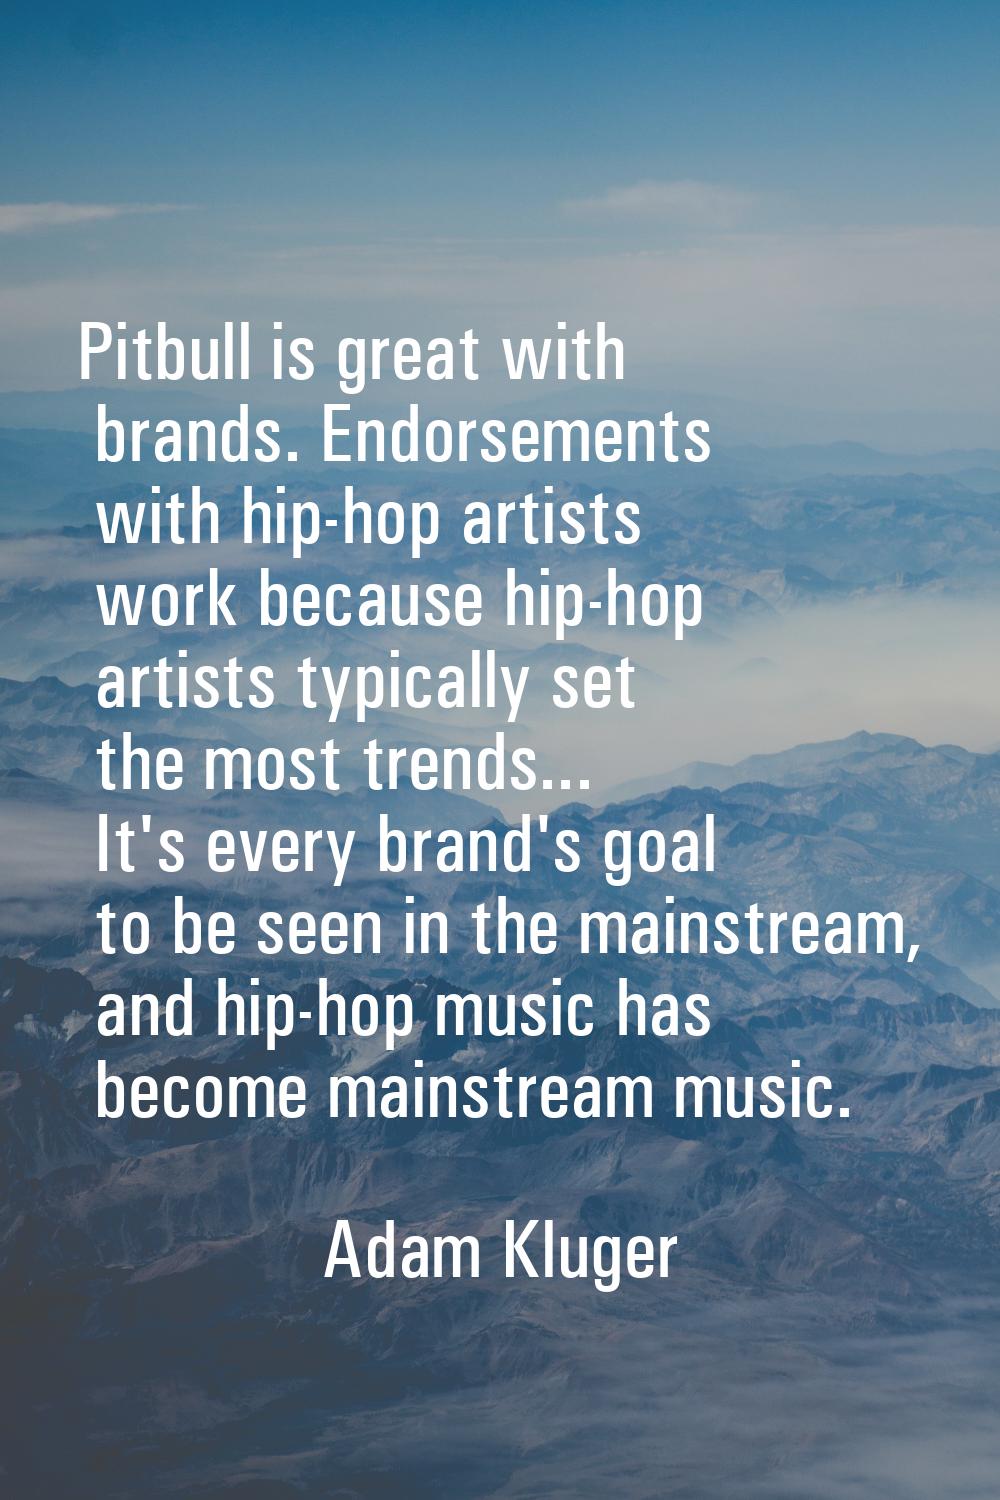 Pitbull is great with brands. Endorsements with hip-hop artists work because hip-hop artists typica